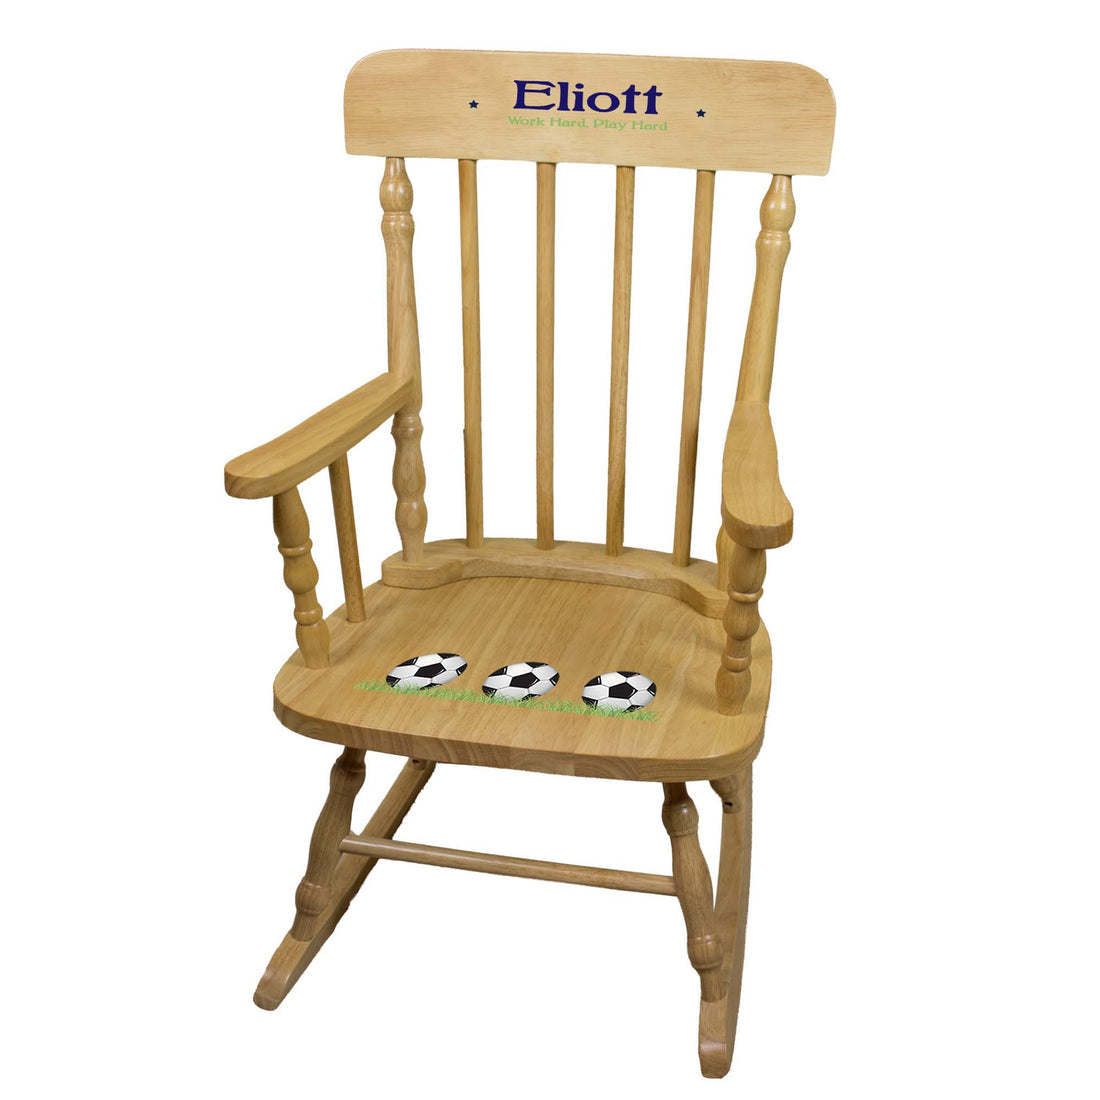 Soccer Natural Spindle Rocking Chair